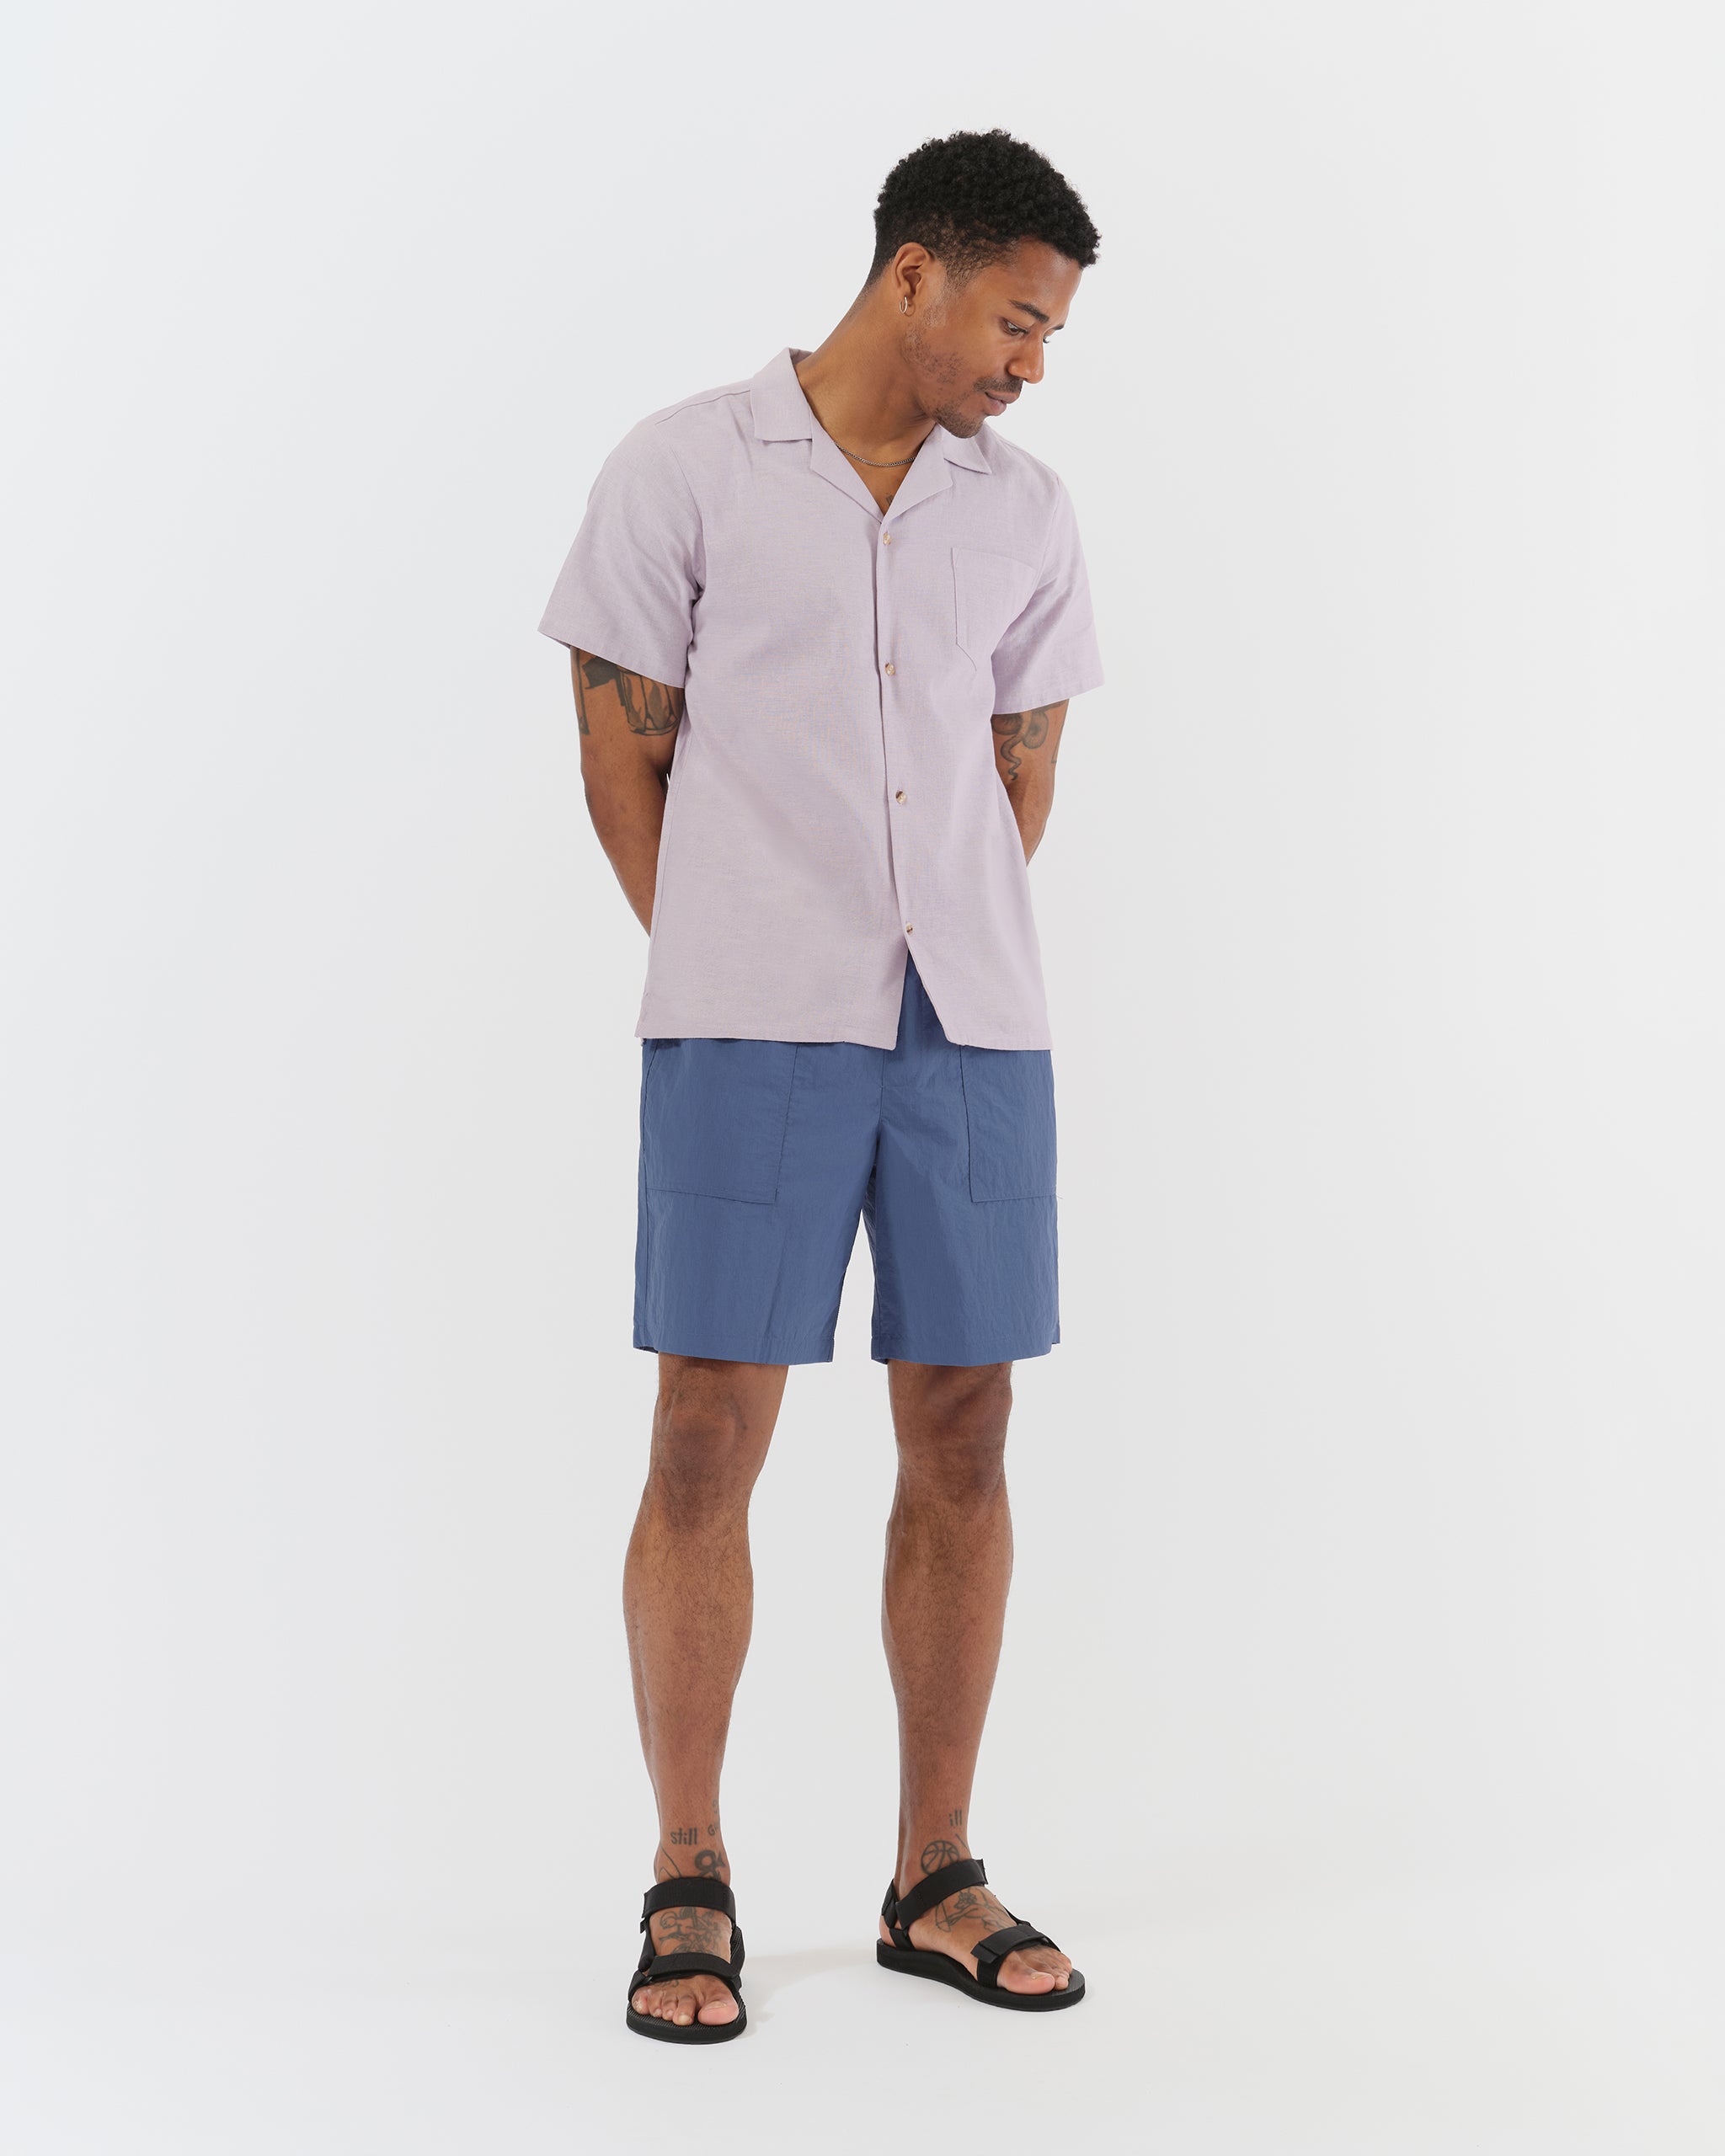 Solid blue utility shorts in ripstop nylon on model